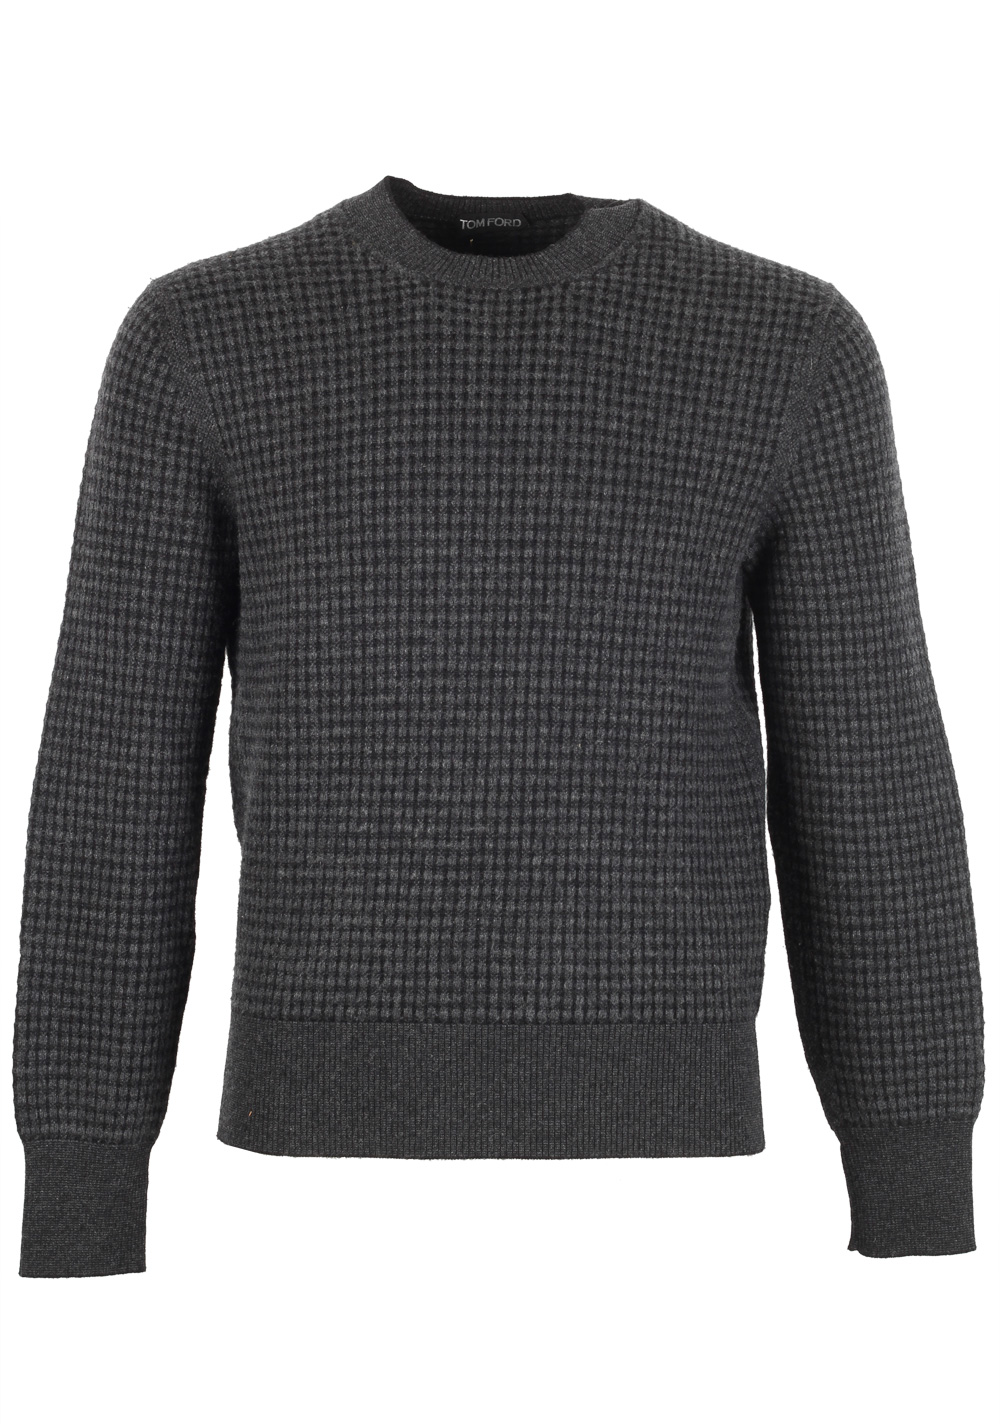 TOM FORD Gray Crew Neck Sweater Size 48 / 38R U.S. In Wool Cashmere ...